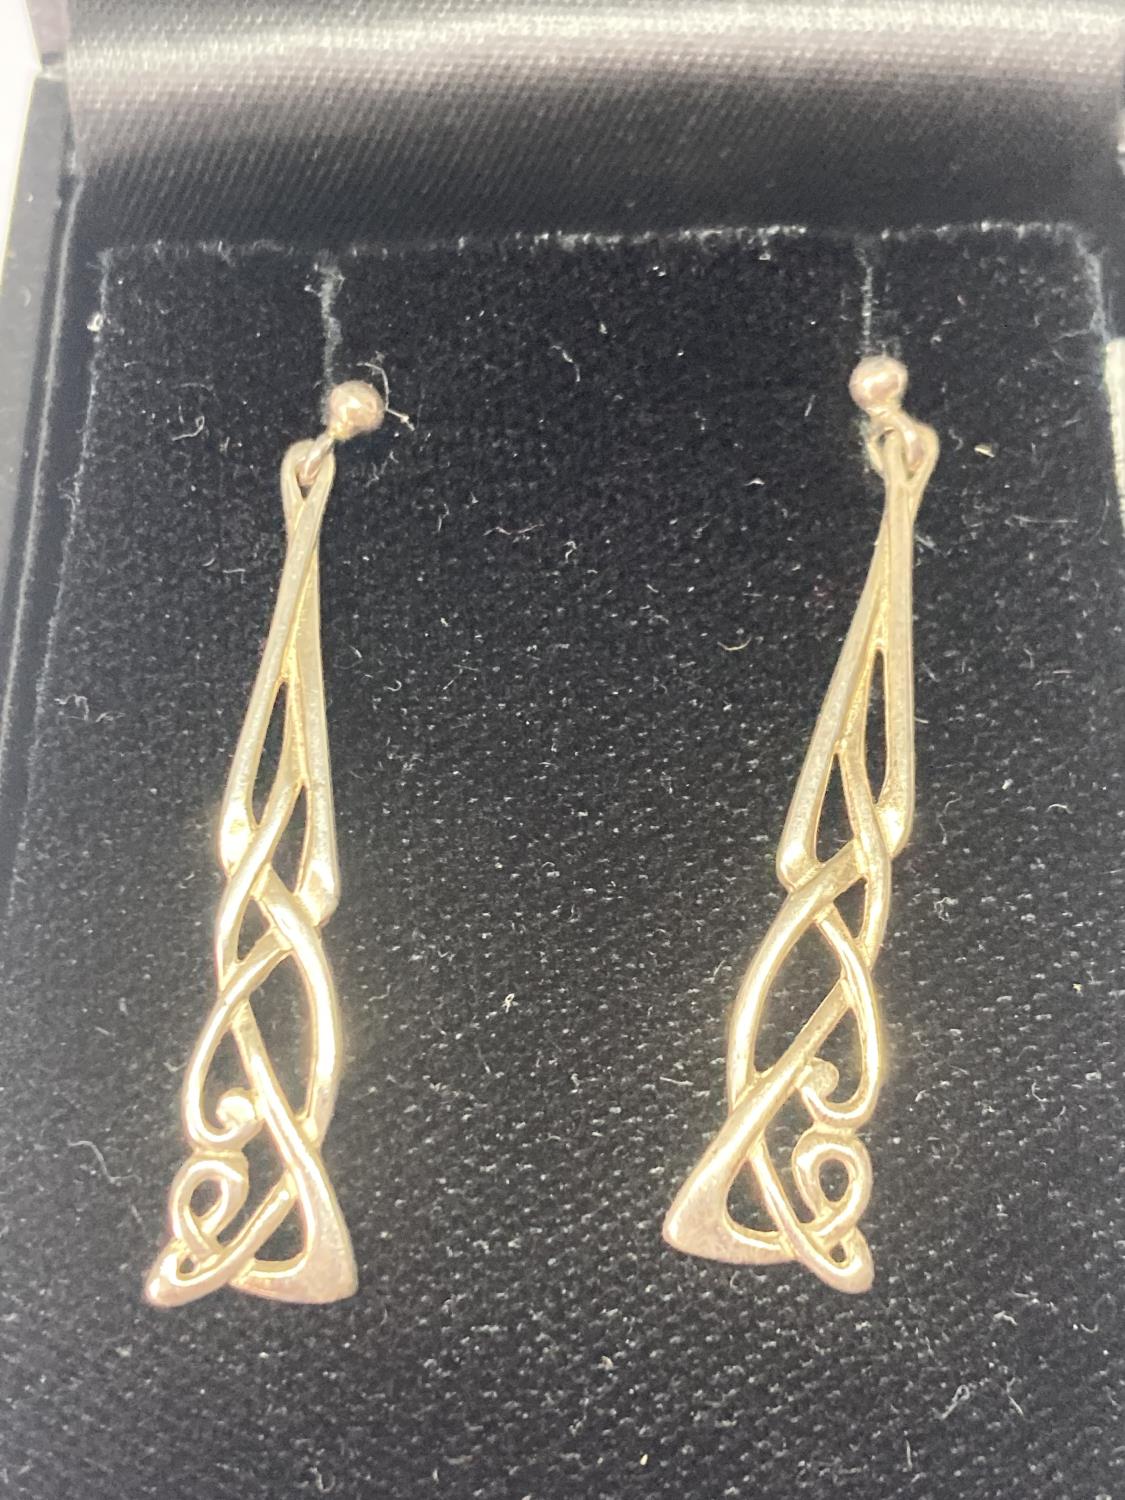 A PAIR OF ARCHIBALD KNOX SILVER EARRINGS IN A PRESENTATION BOX - Image 2 of 3